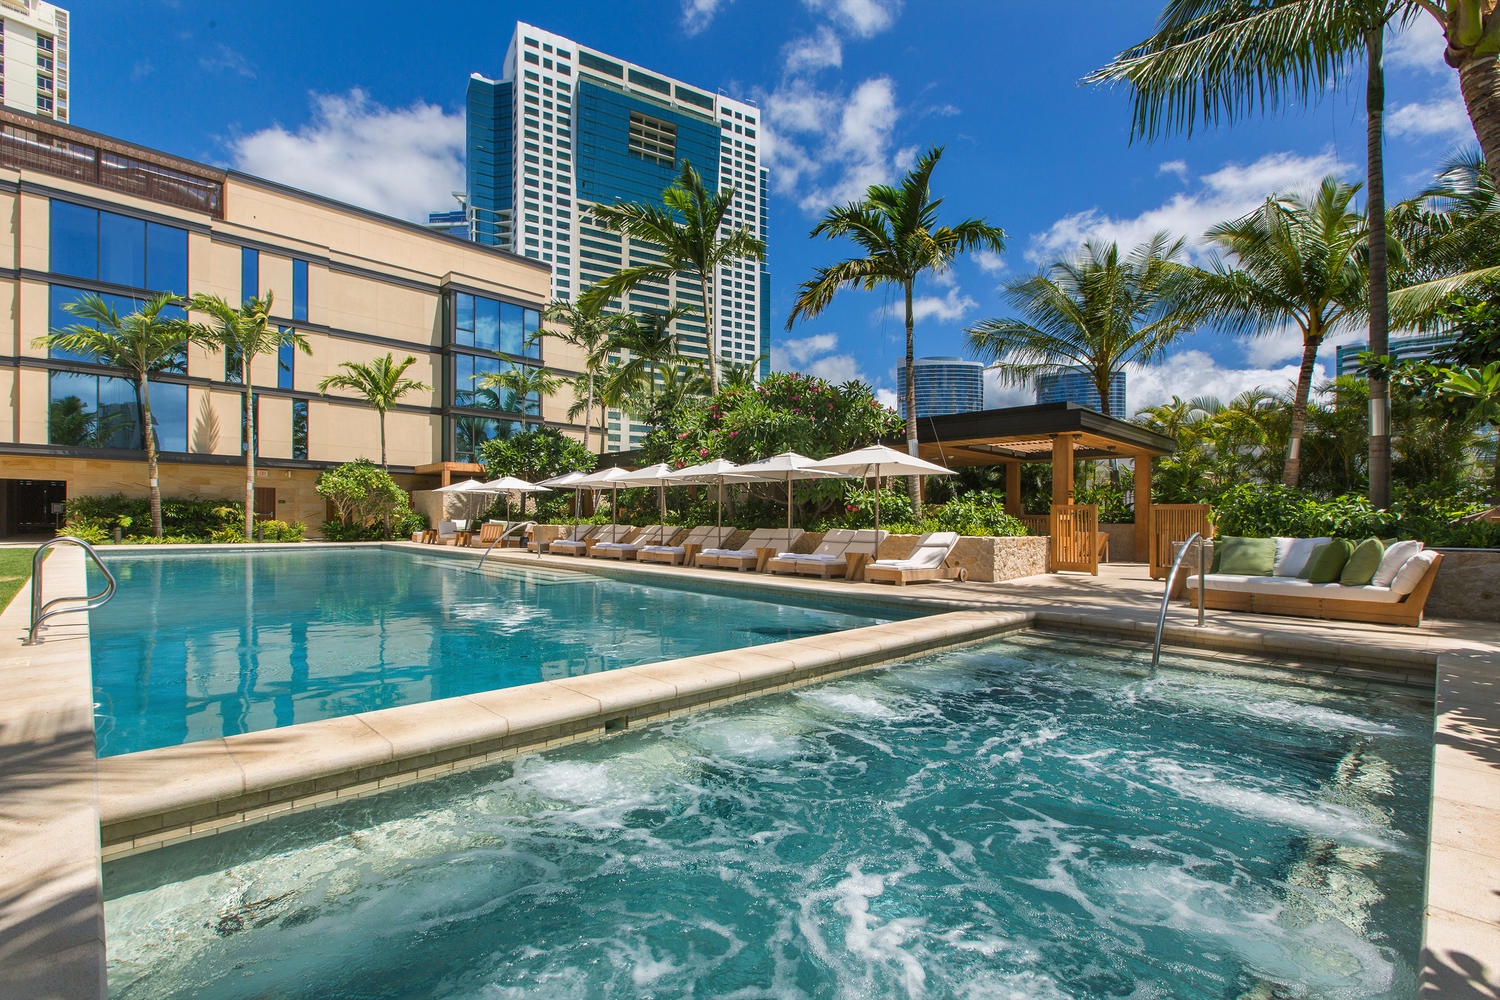 Honolulu Vacation Rentals, Park Lane Sky Resort - Take a refreshing swim in the community pool or relax in the jacuzzi